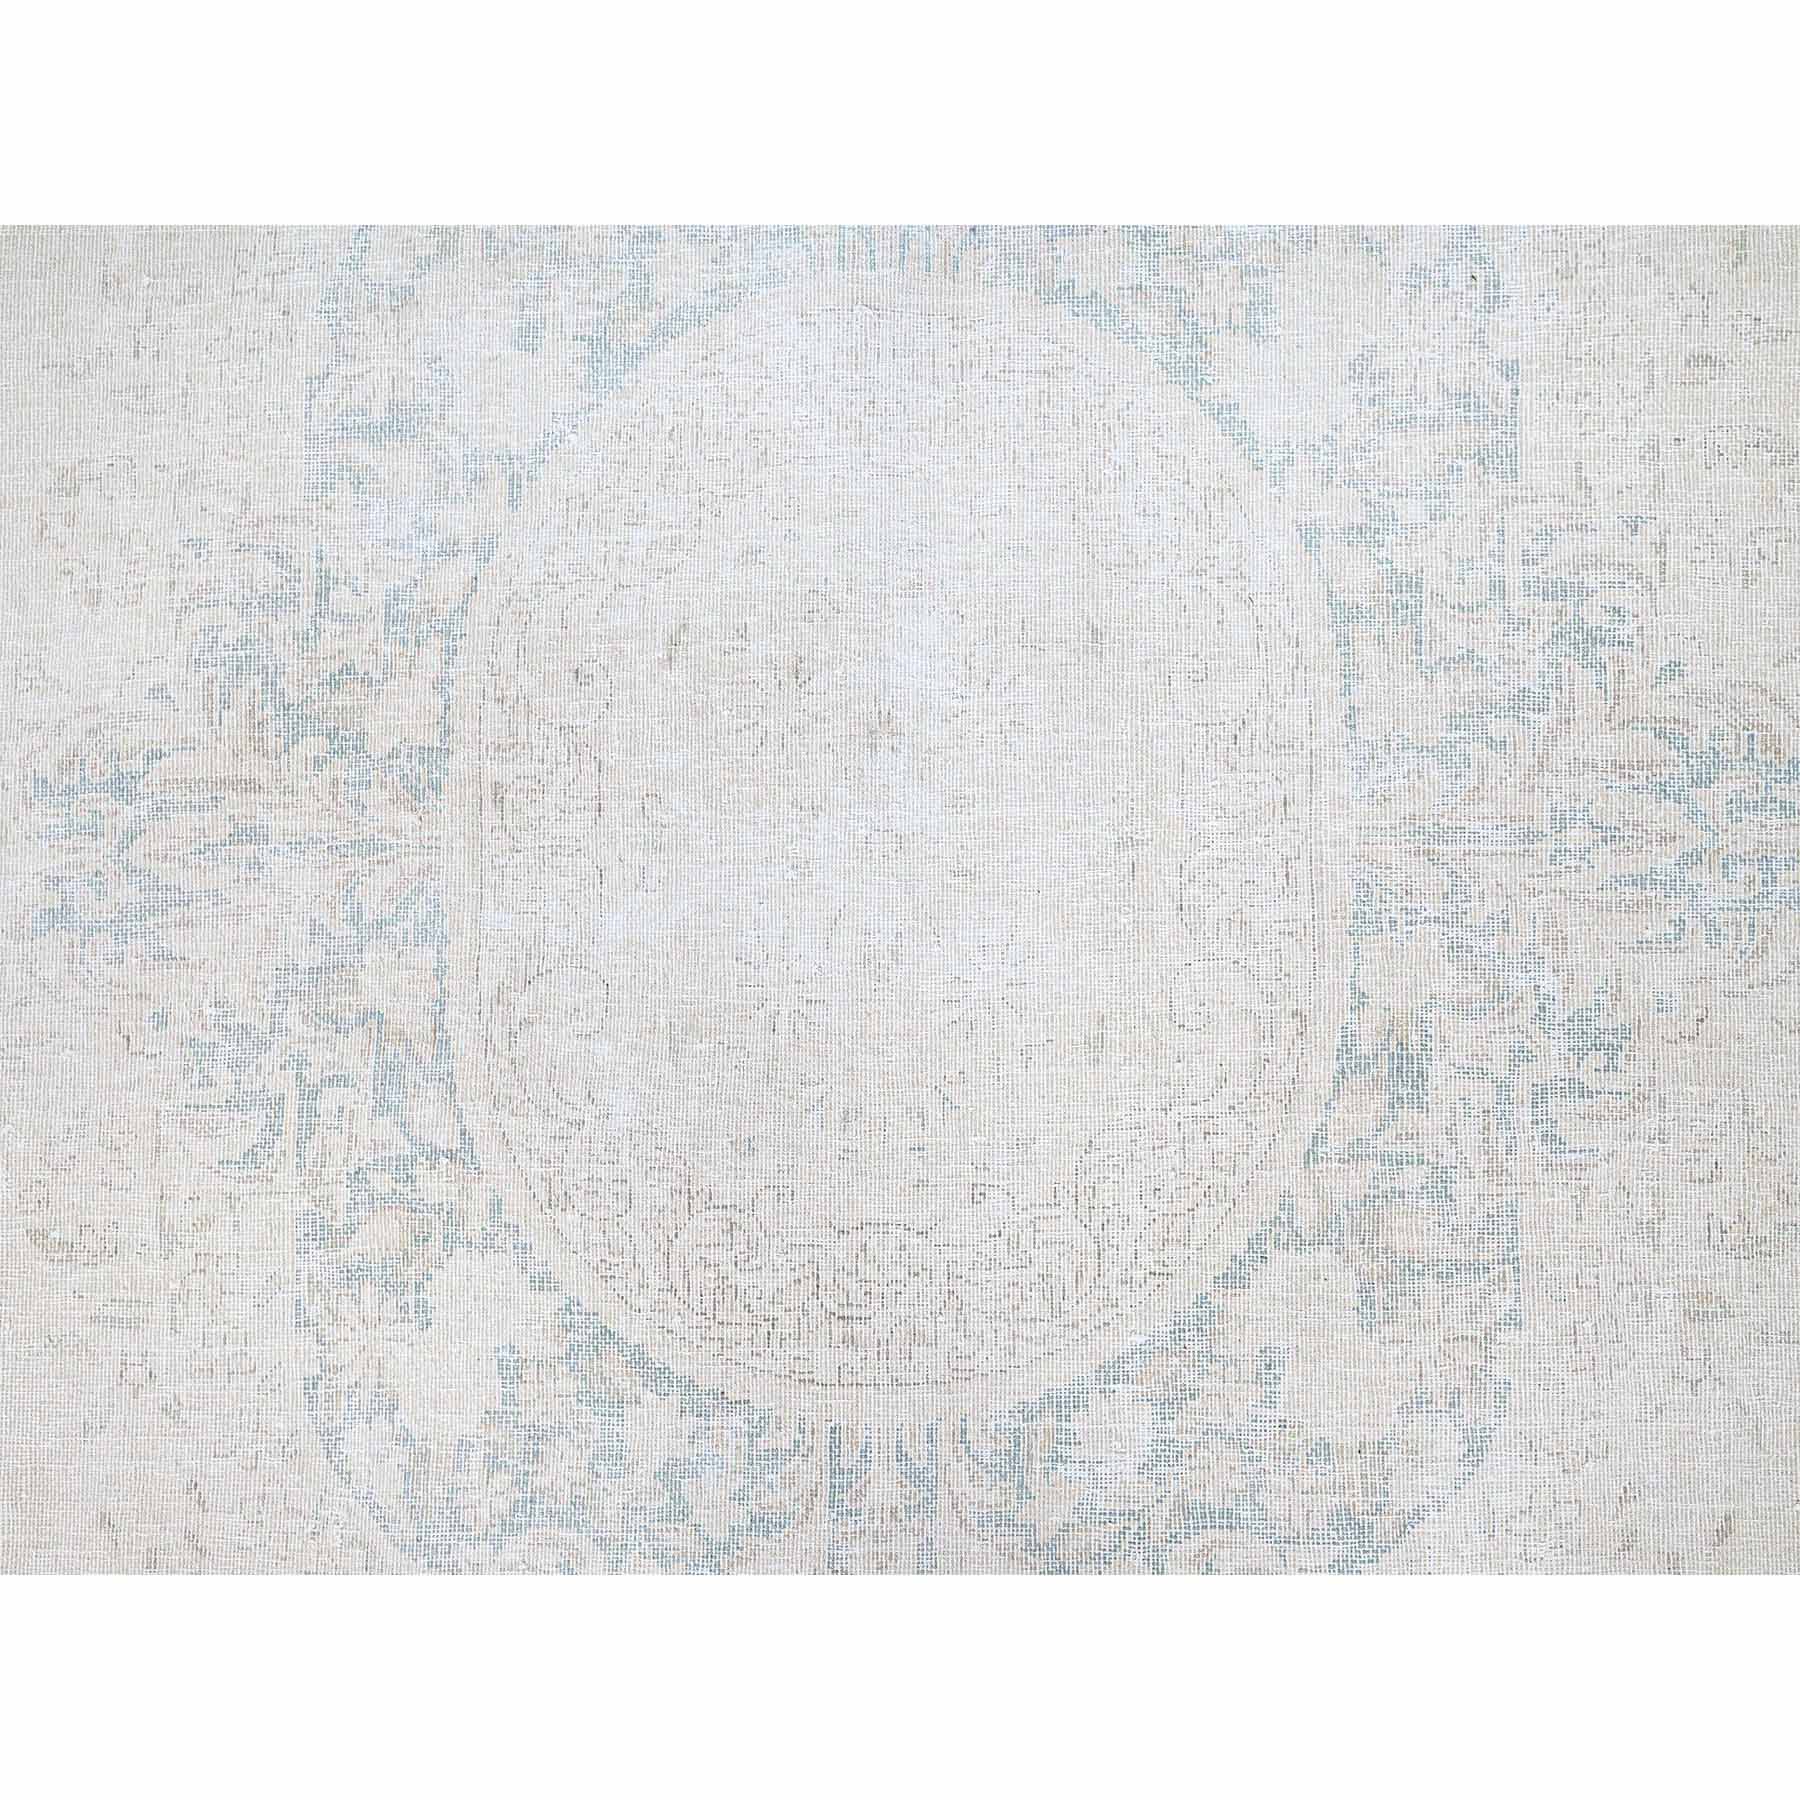 Overdyed-Vintage-Hand-Knotted-Rug-427625